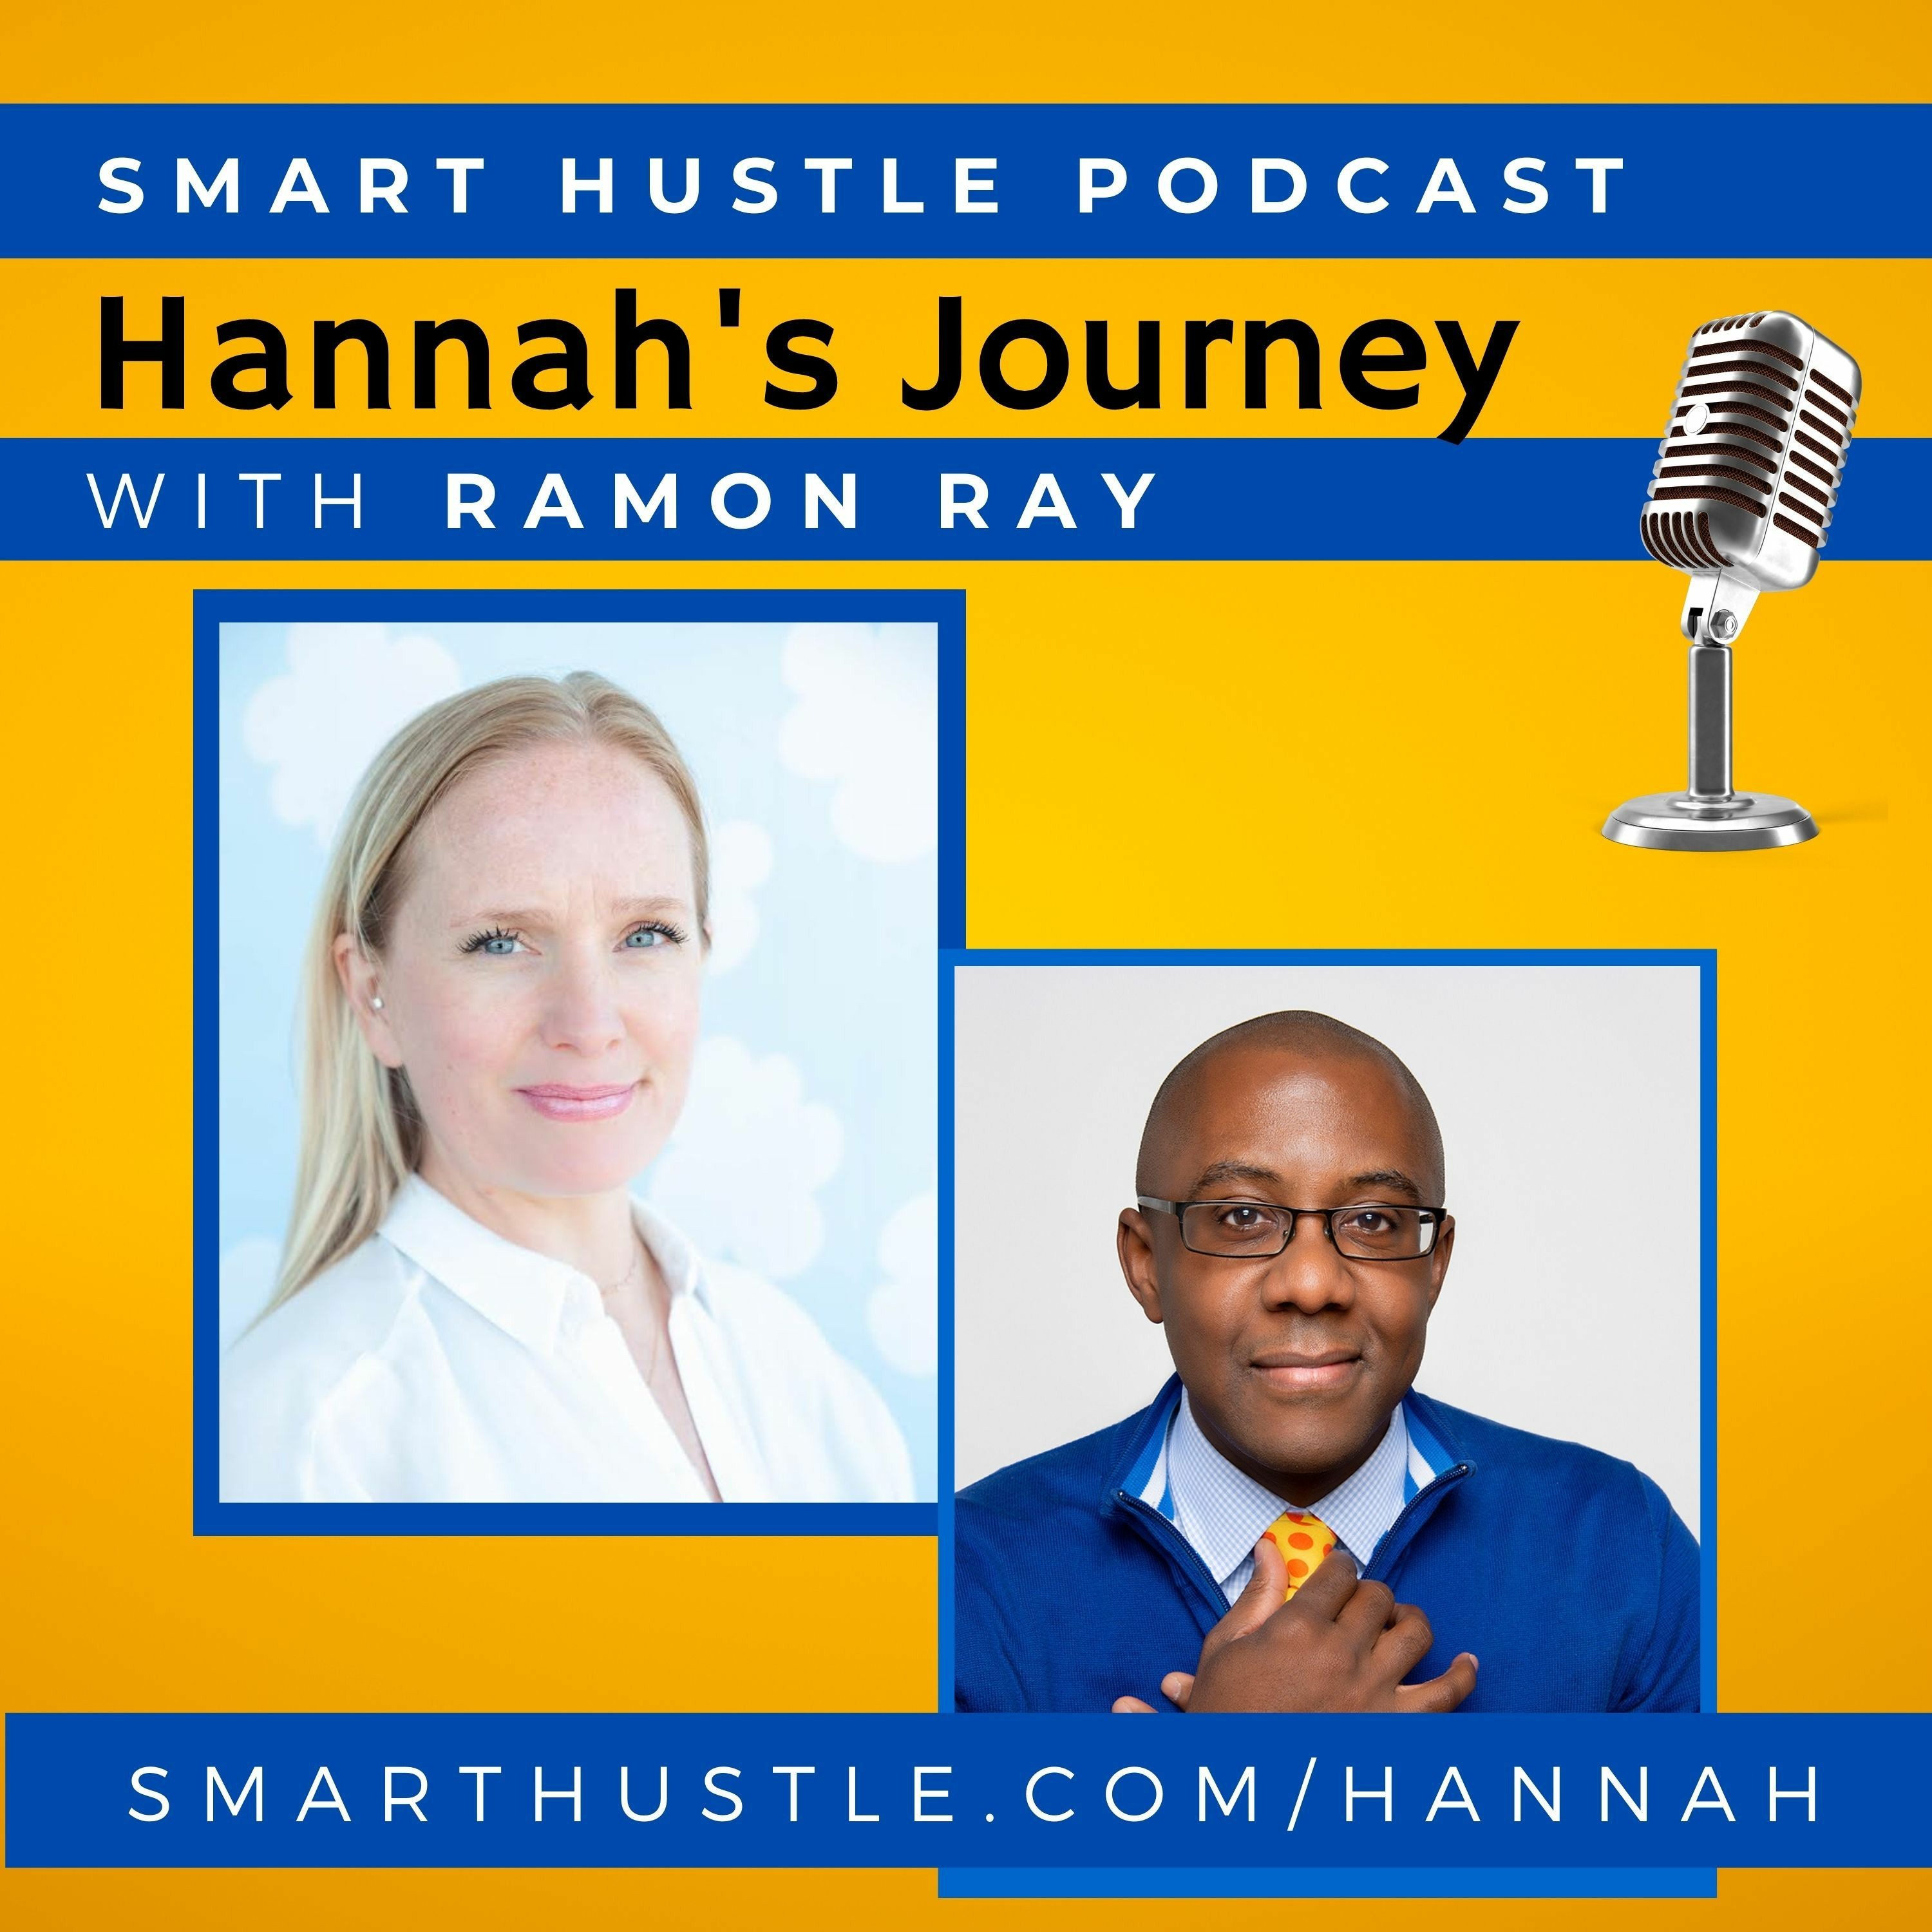 Hannah's Journey - Why She's Franchising